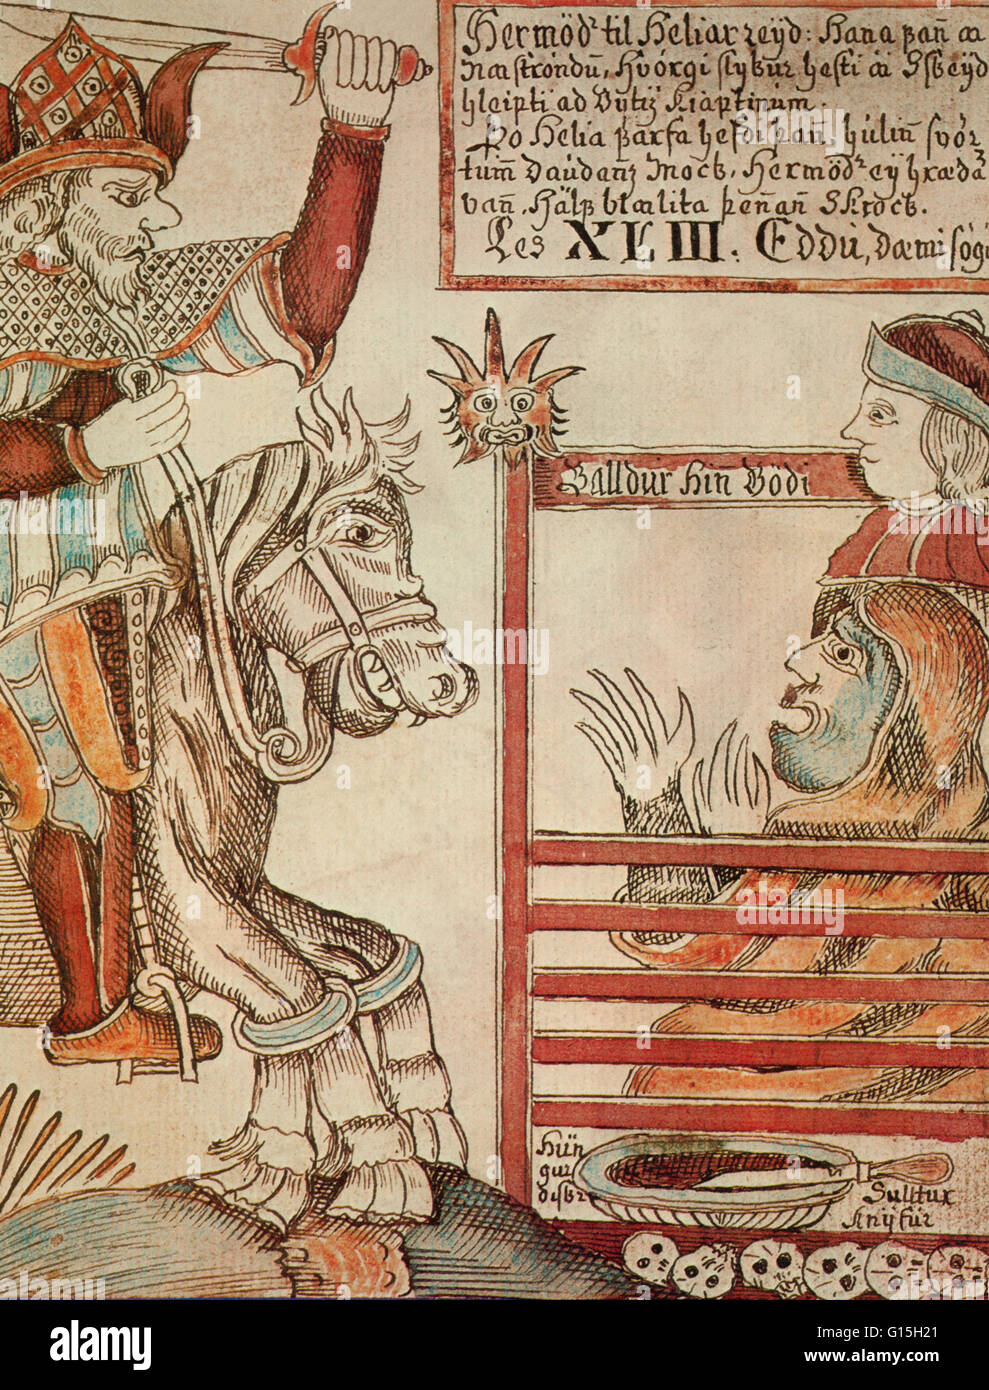 An illustration the Norse god Hermod riding to retrieve the god Baldr from Hel (the underworld), from an 18th century Icelandic manuscript. Stock Photo